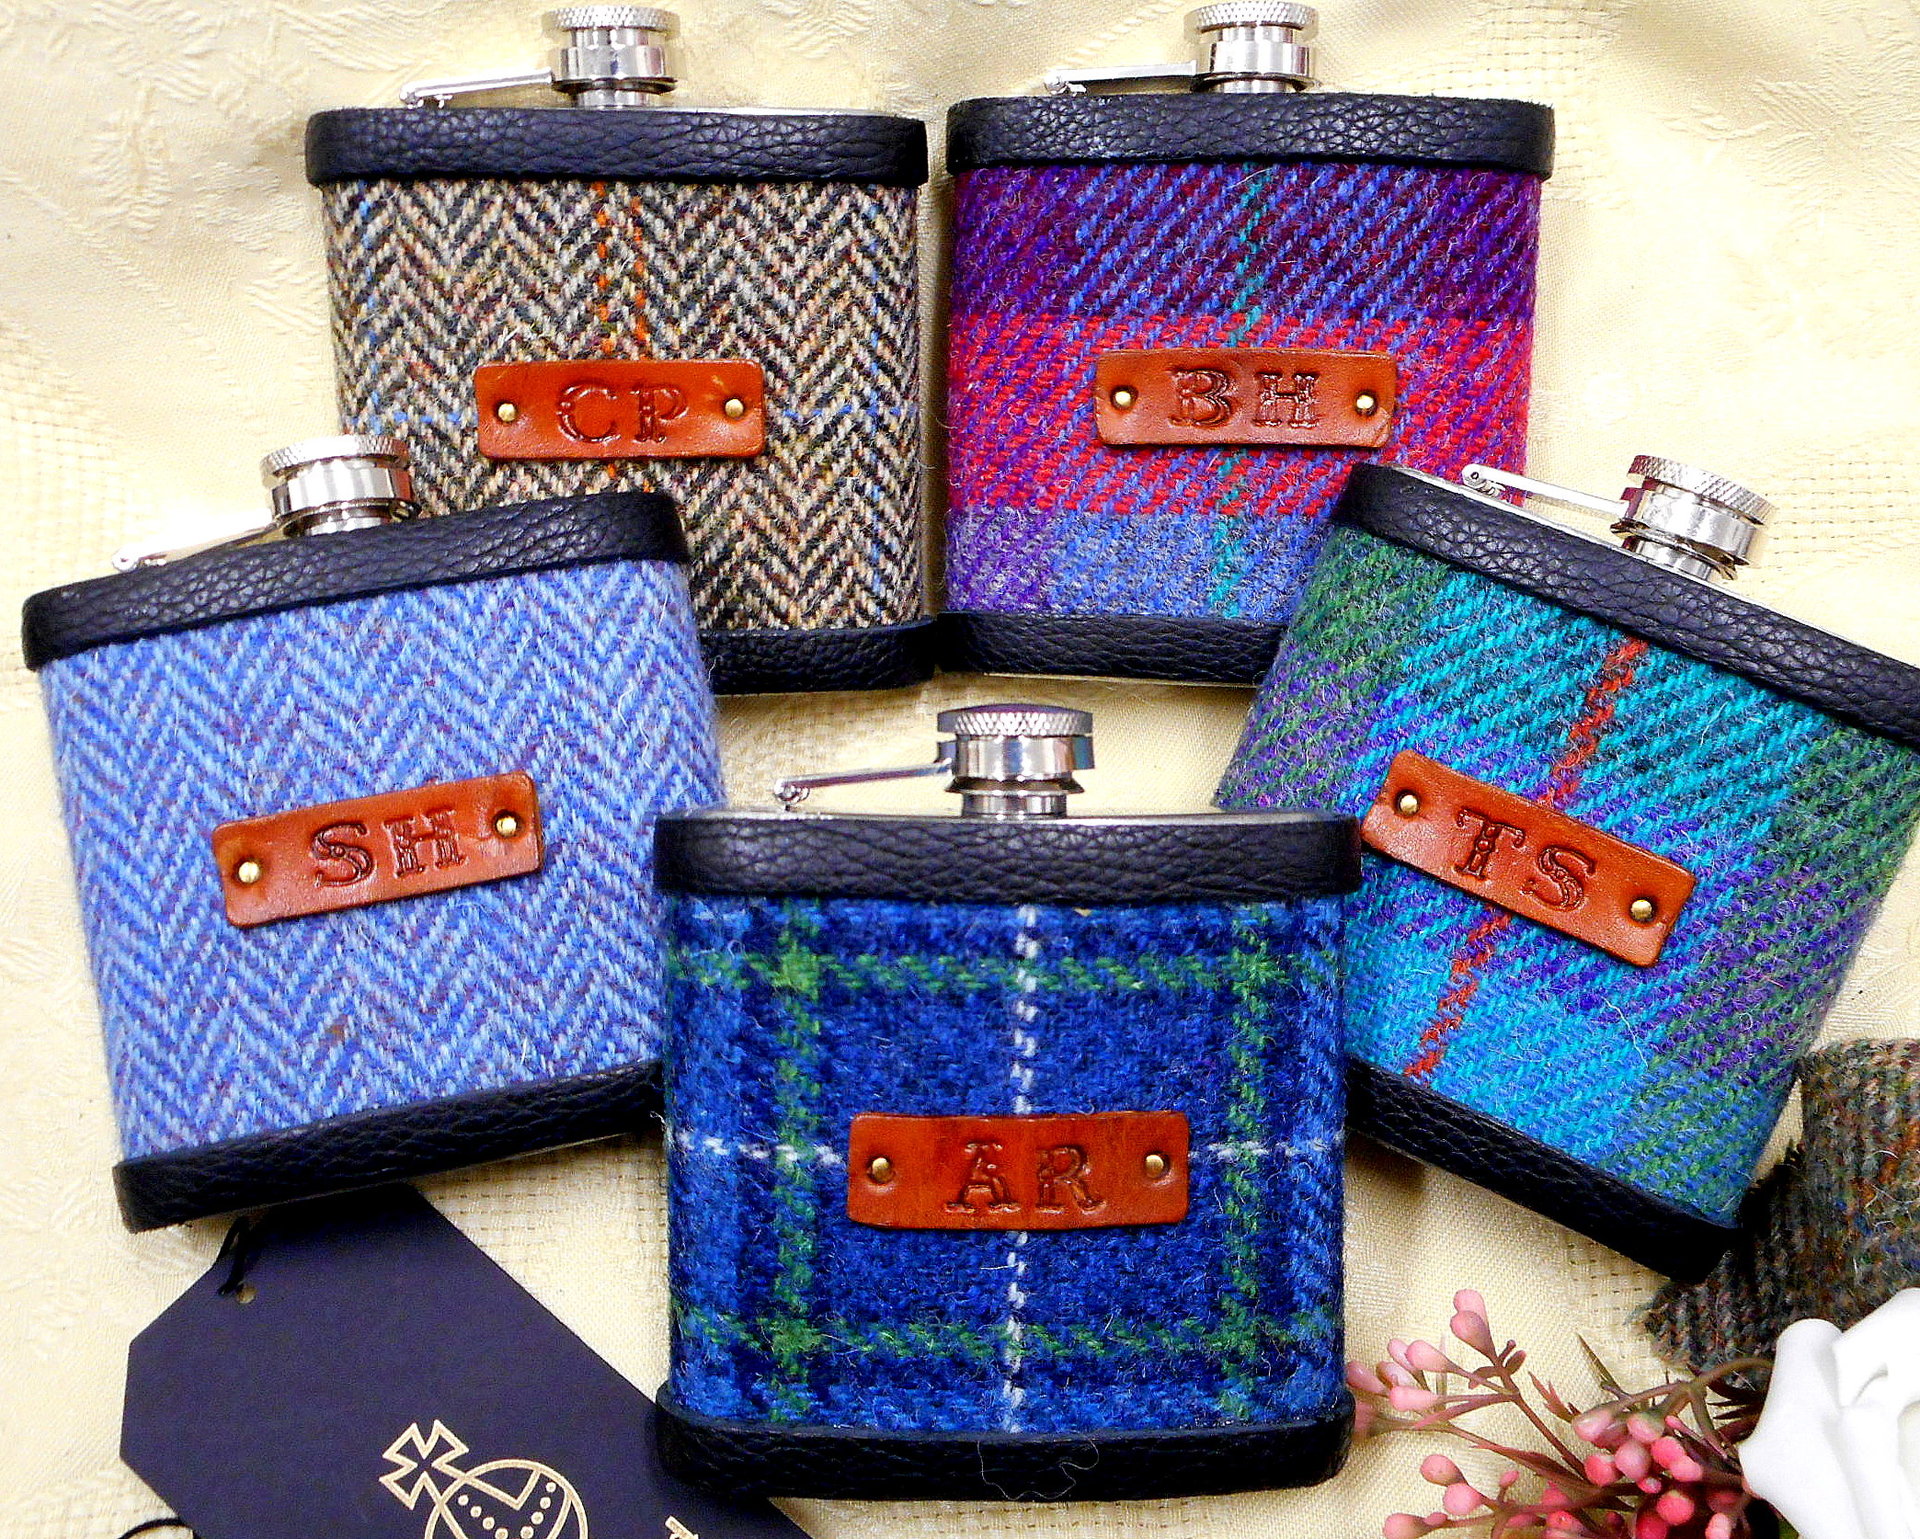 Personalised groomsmens Monogrammed Harris Tweed hip flasks with 1-3 initials on brown leather for Best Man or Ushers at wedding , Father of the Bride or Groom